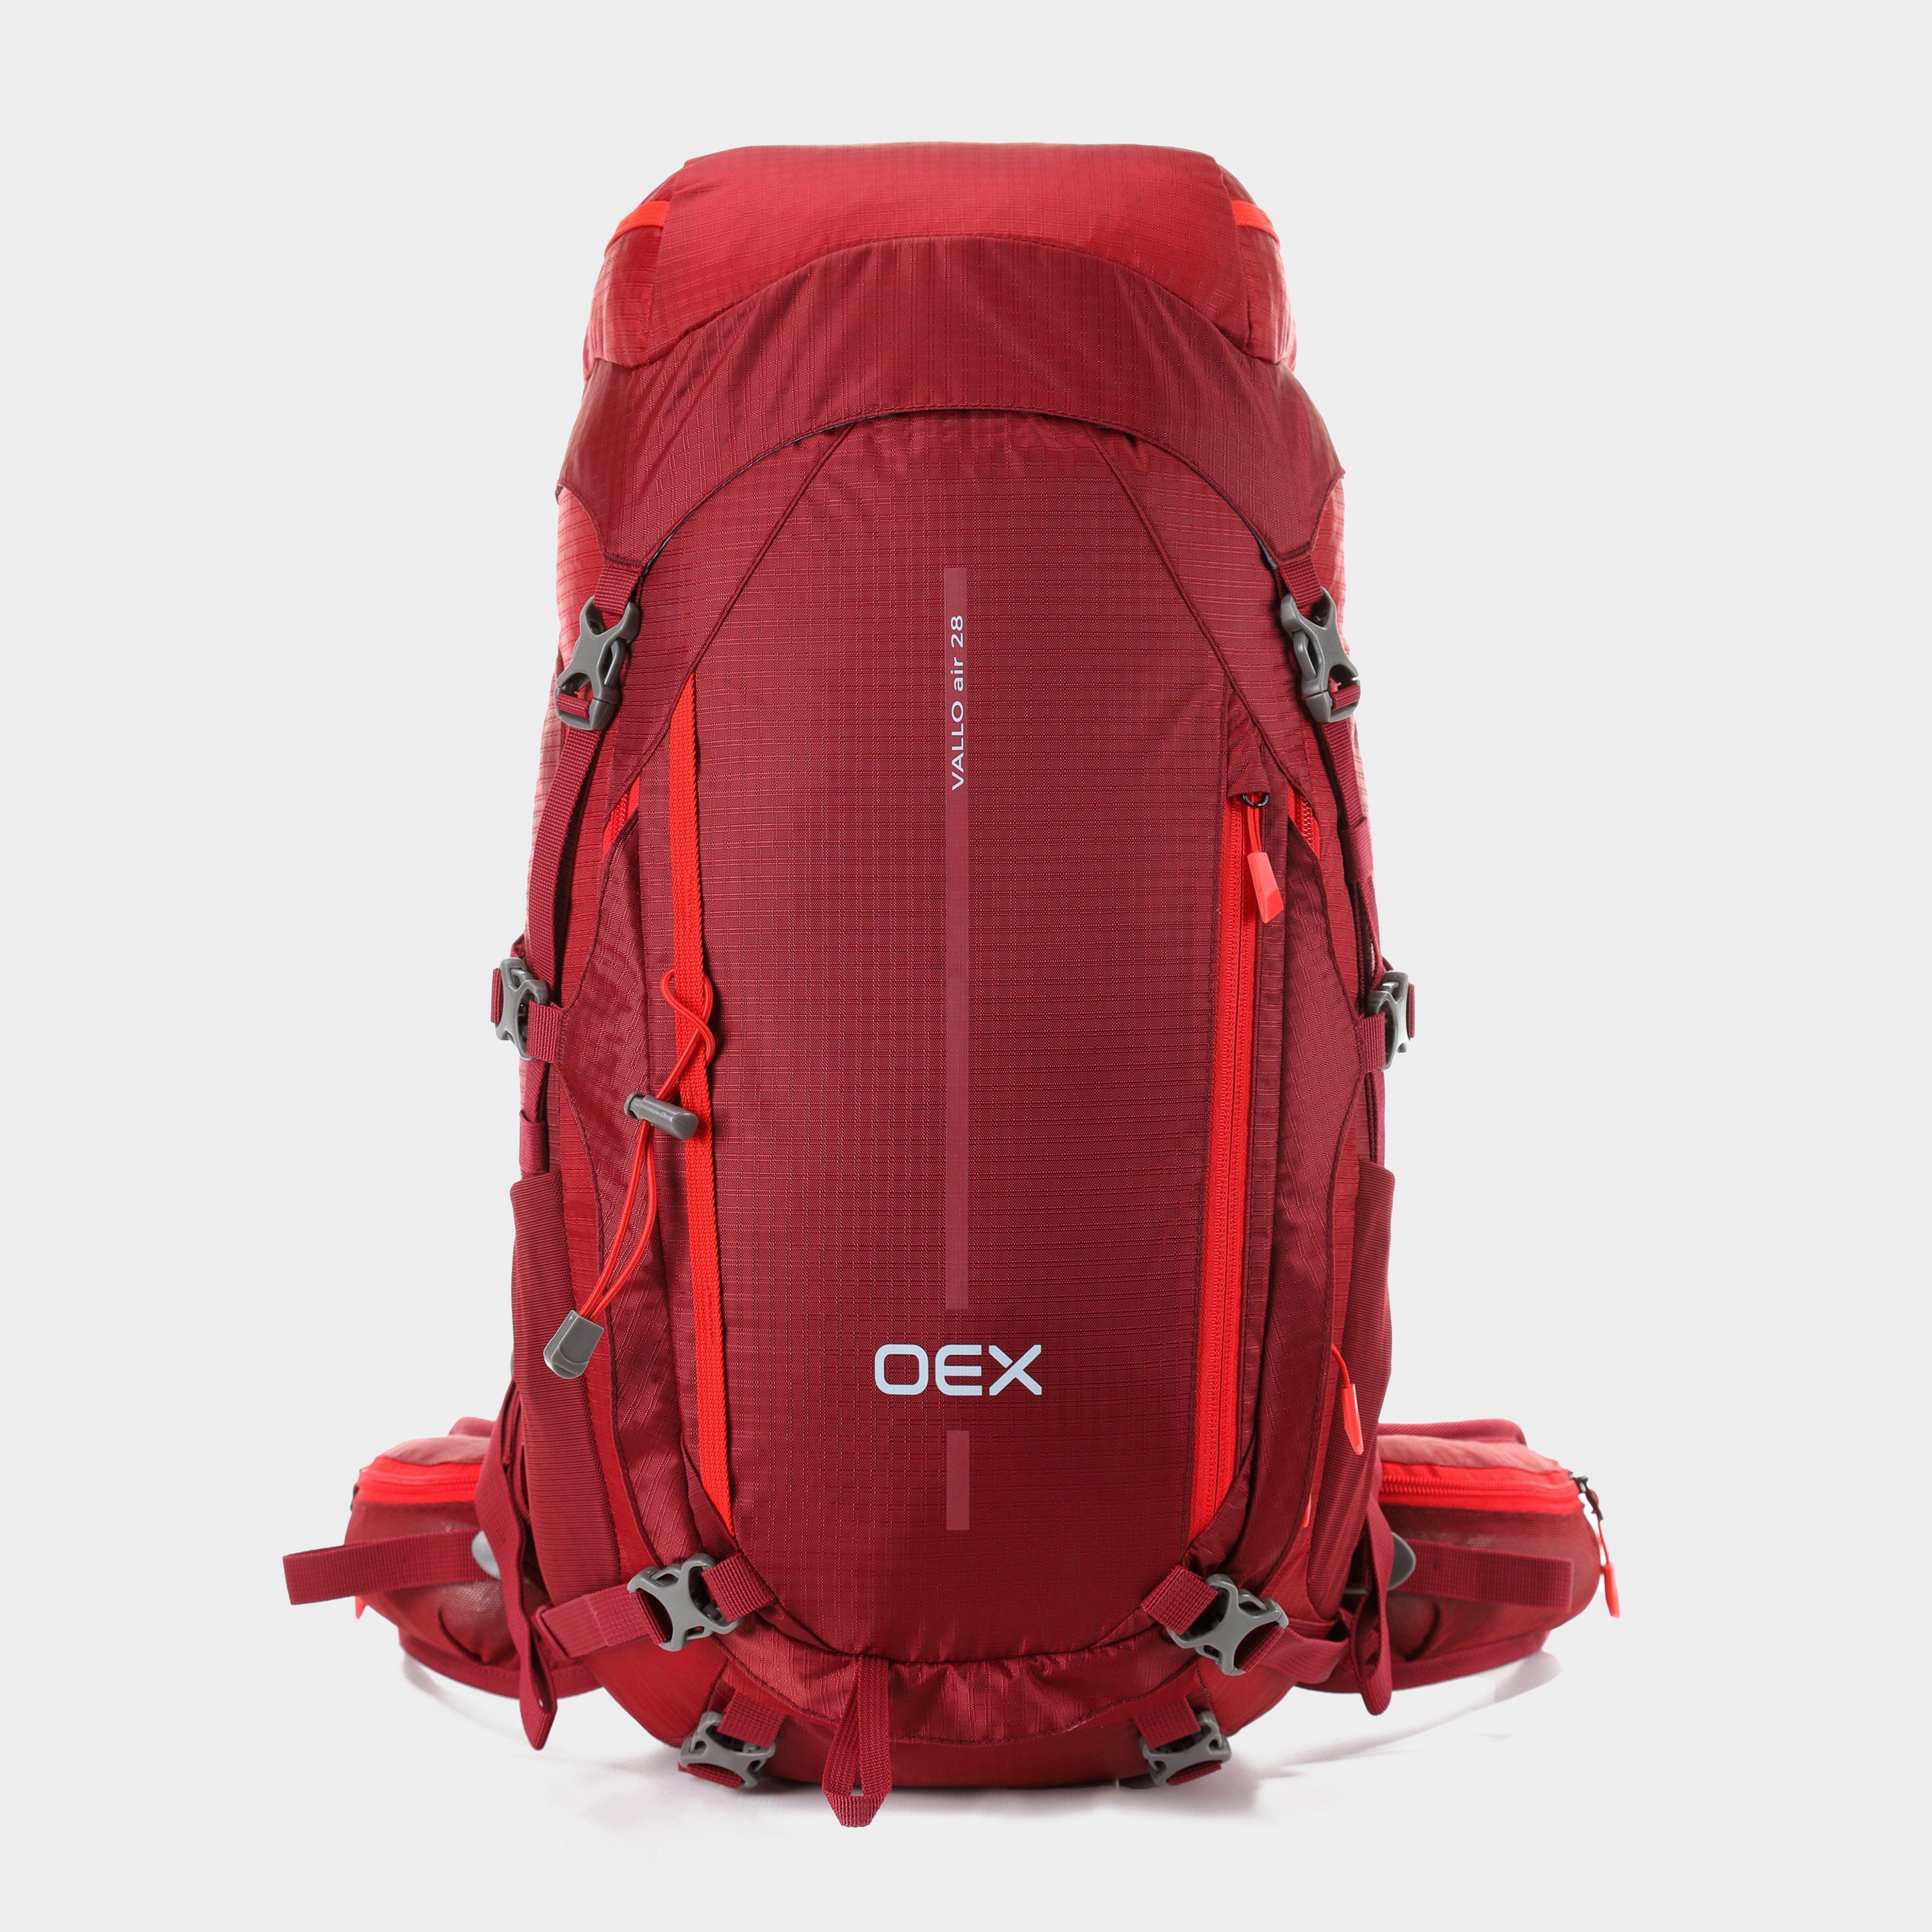 Photos - Backpack OEX Vallo Air 28 Rucksack, Red 